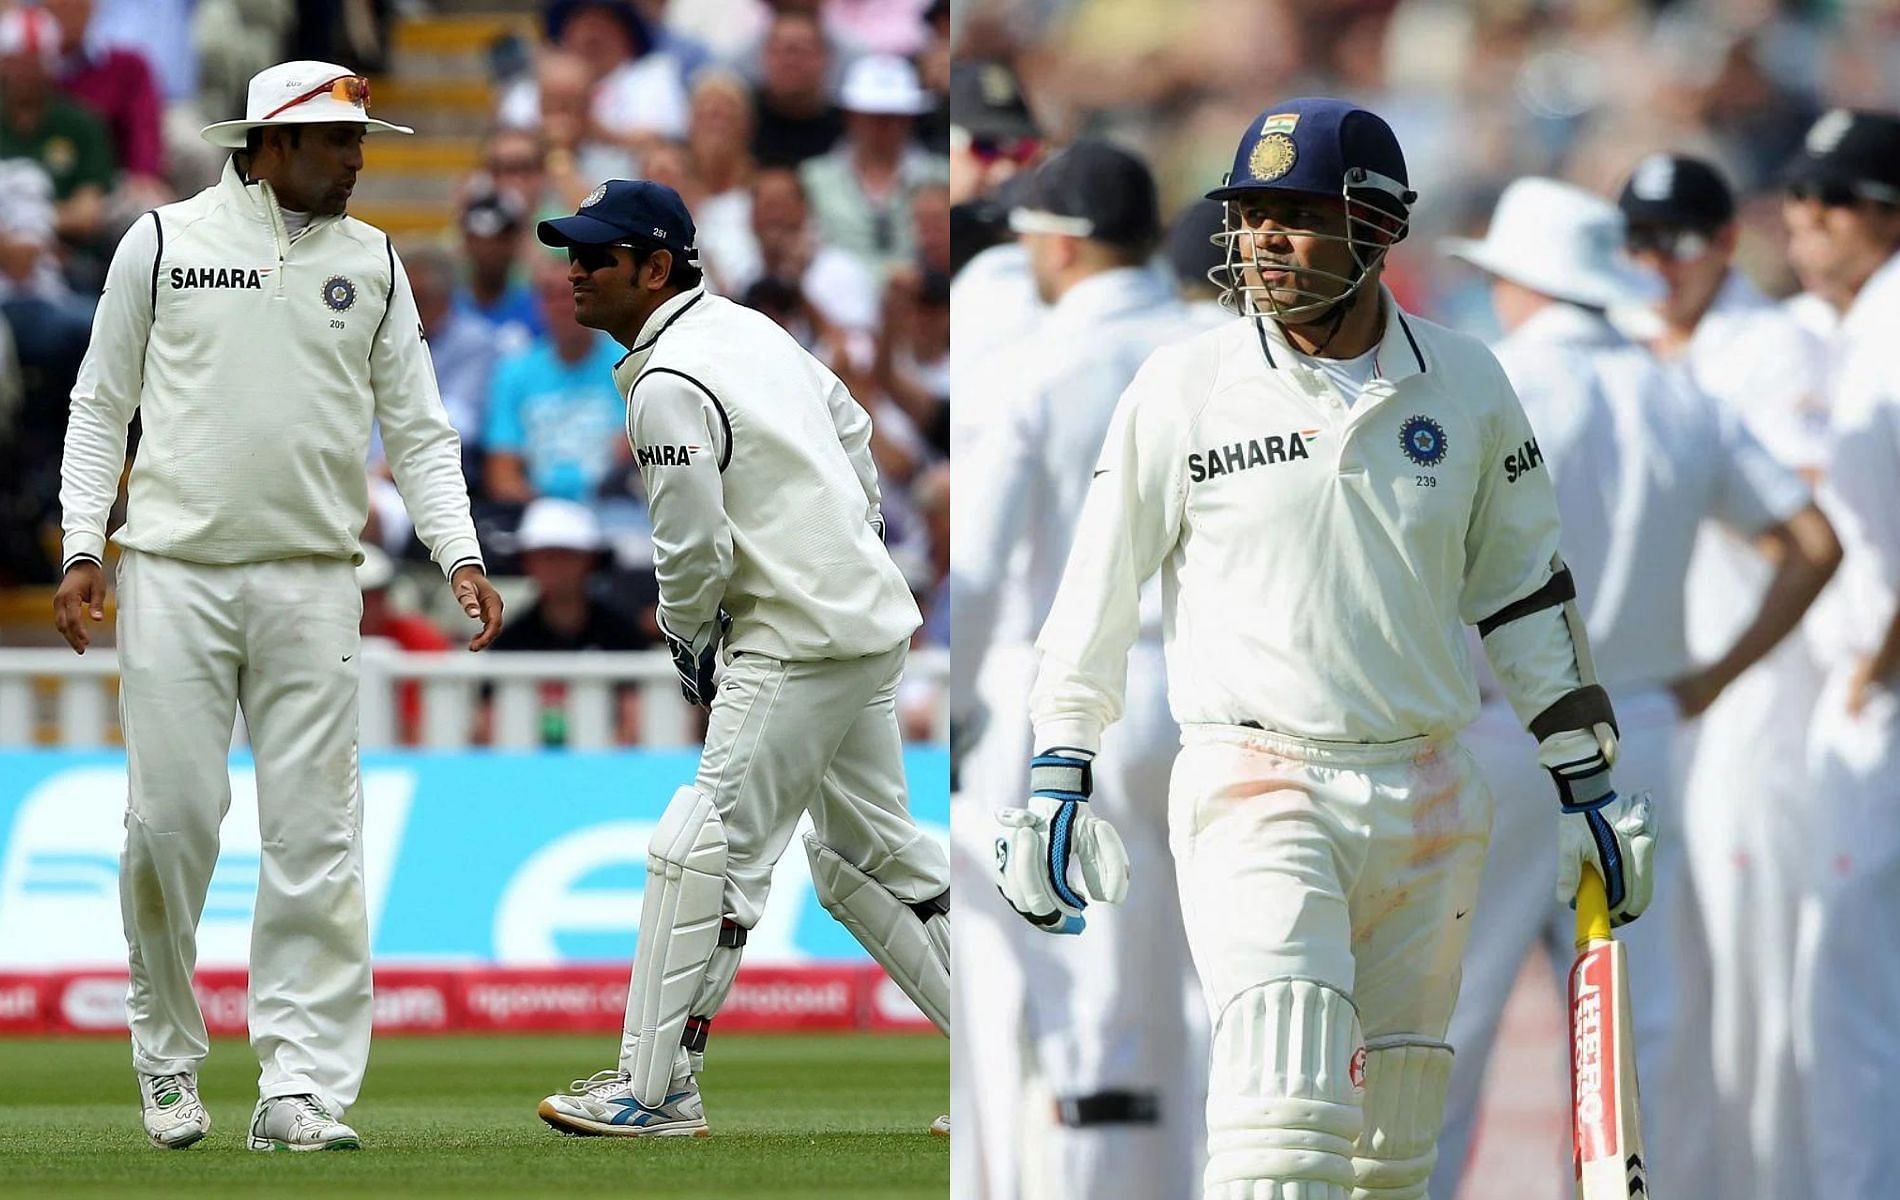 (L to R) VVS Laxman, MS Dhoni and Virender Sehwag. (Pics: Getty)